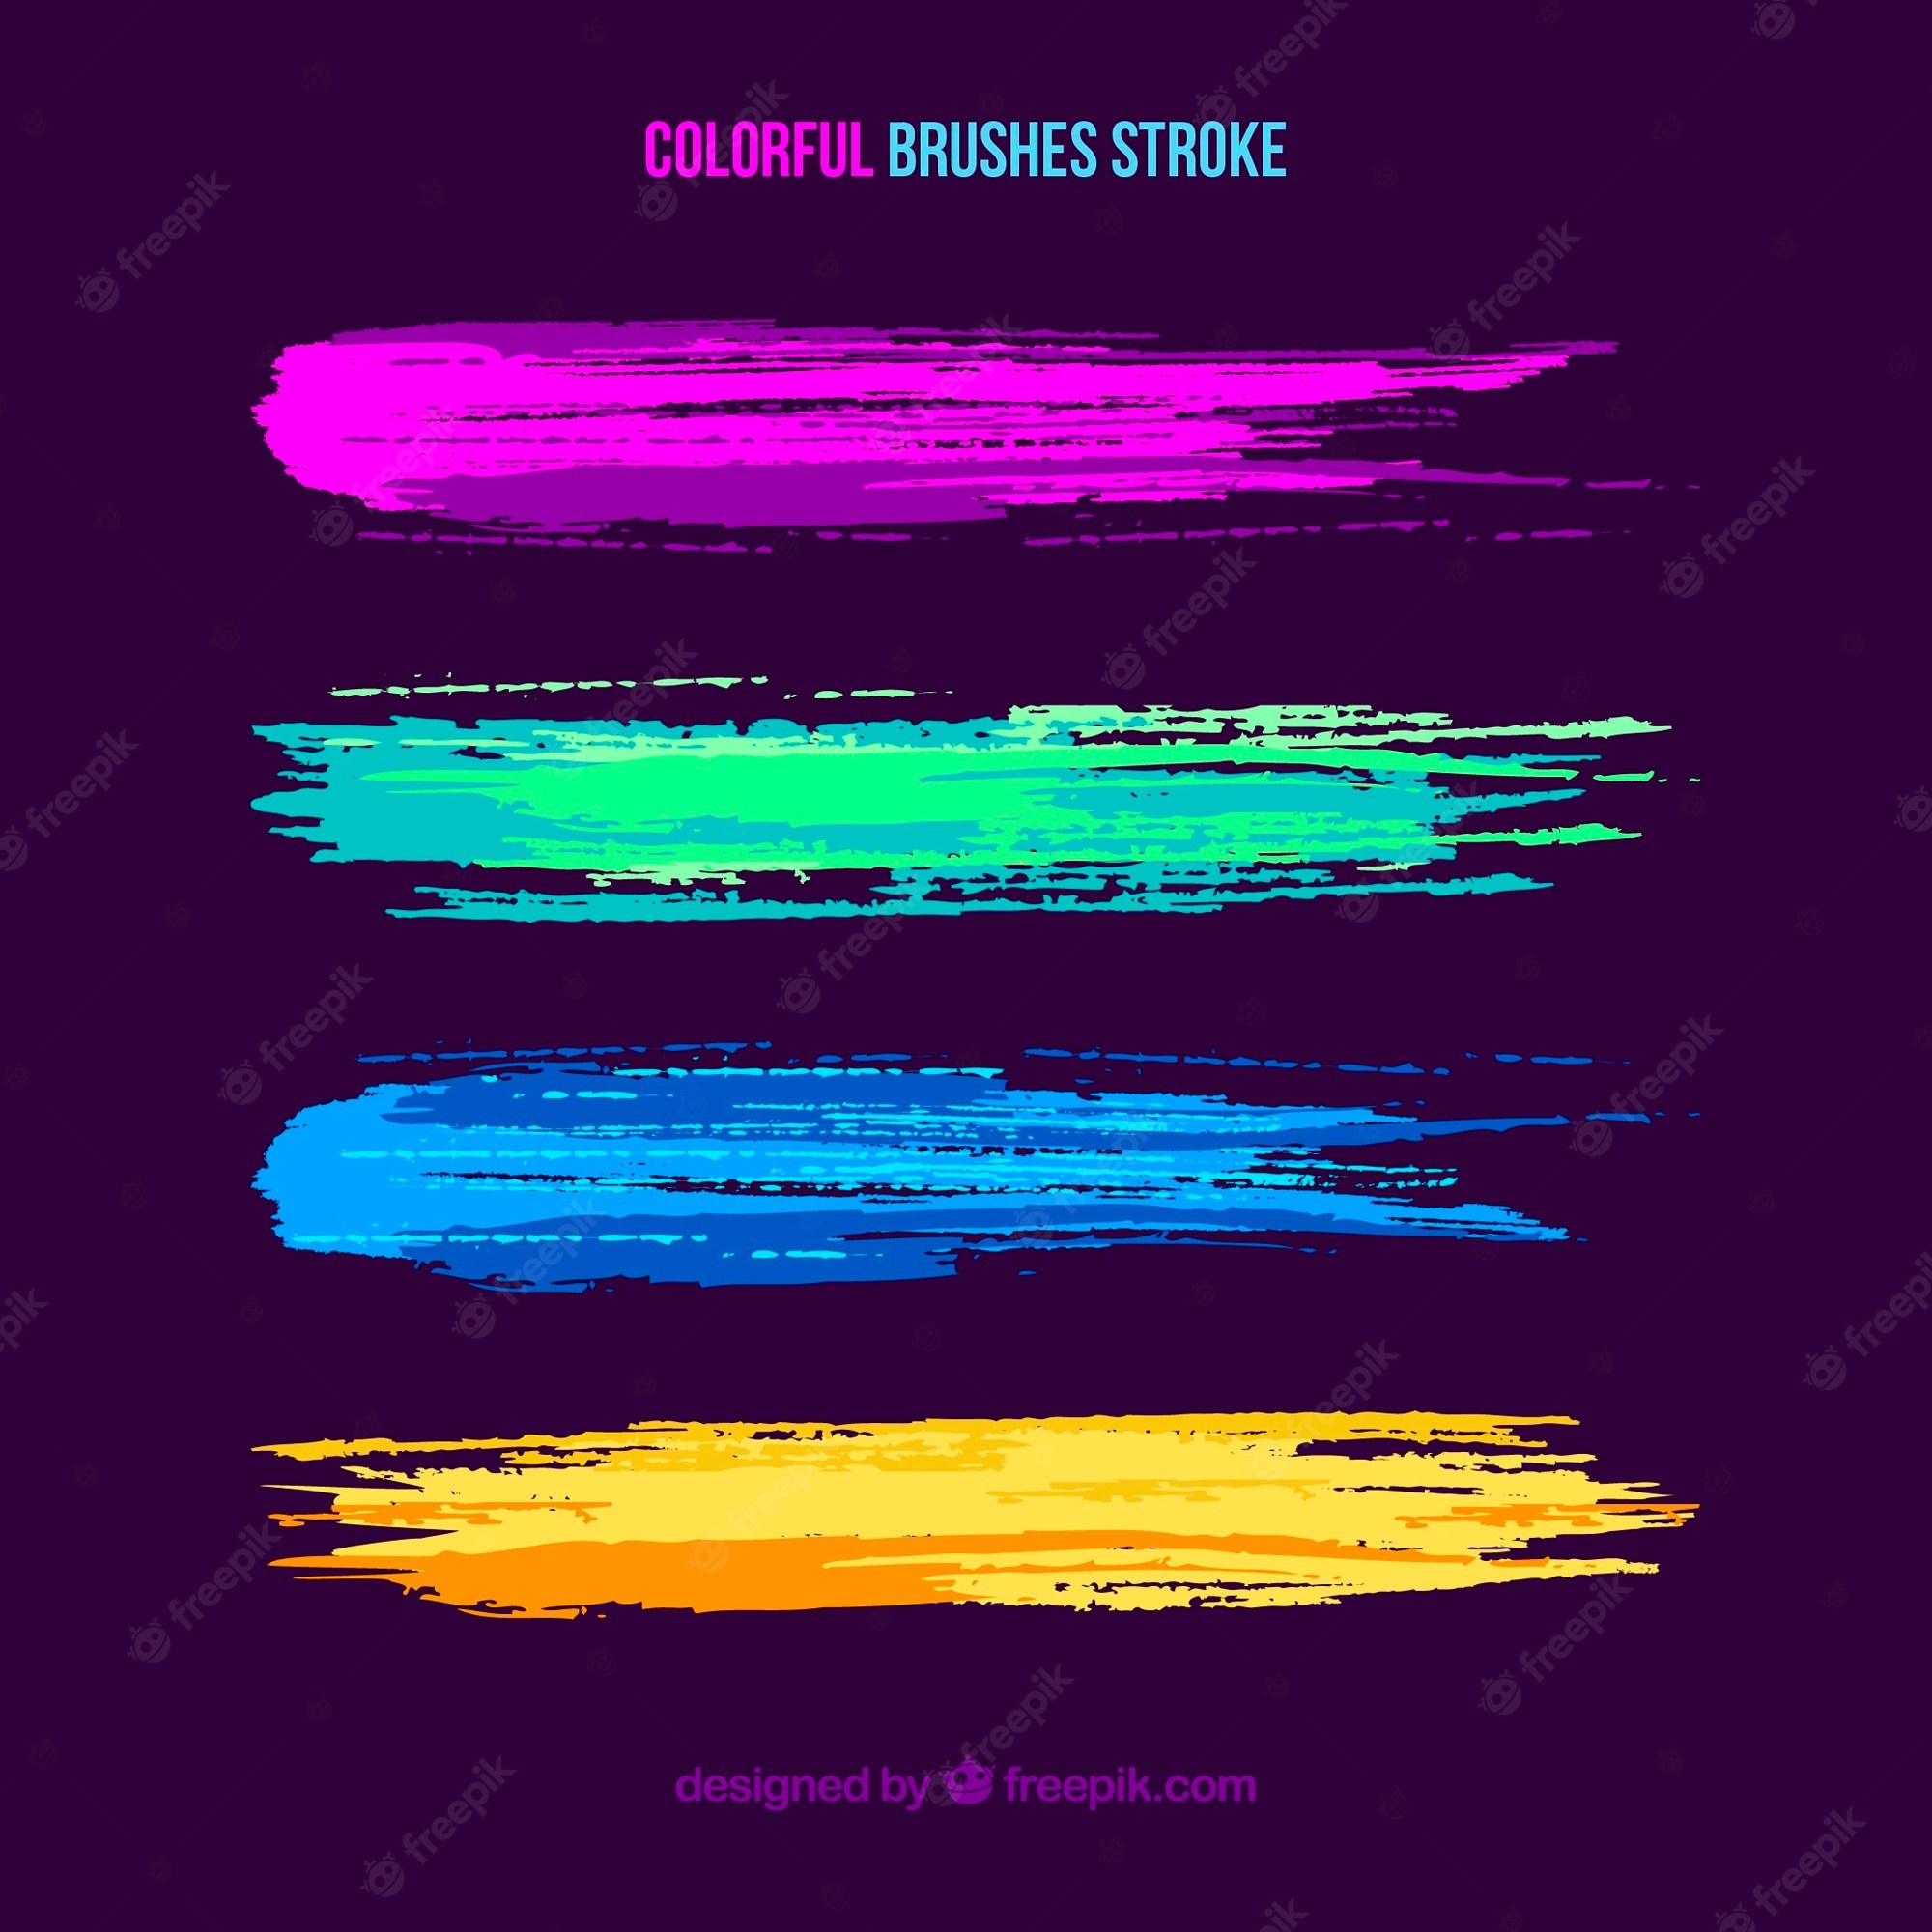 Picture of: Colorful Brush Stroke Images – Free Download on Freepik